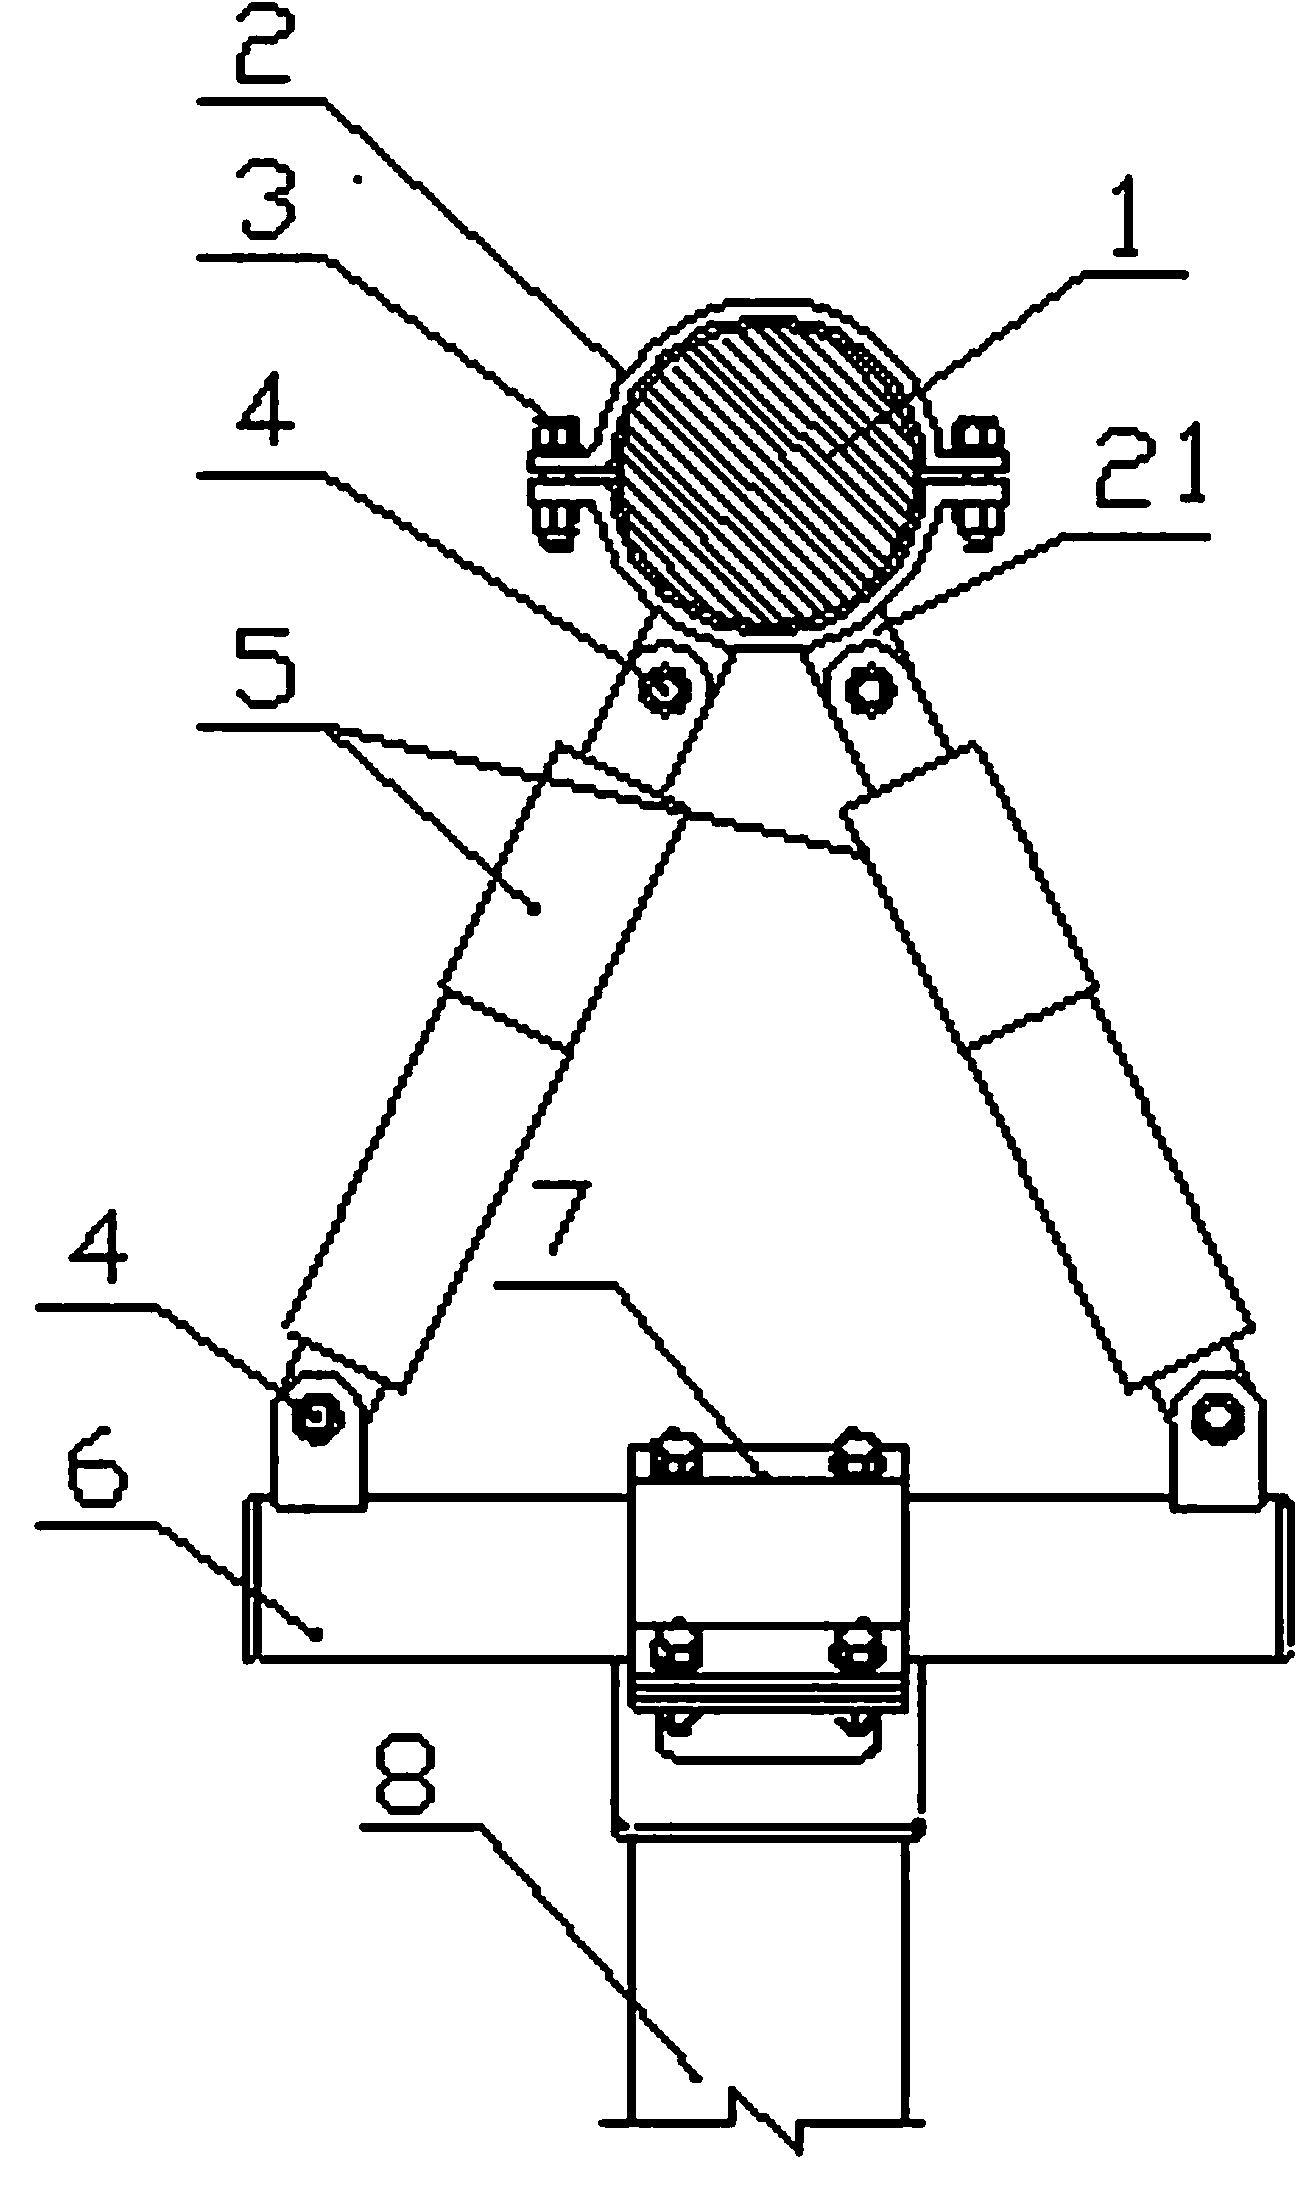 External stay cable type damping device